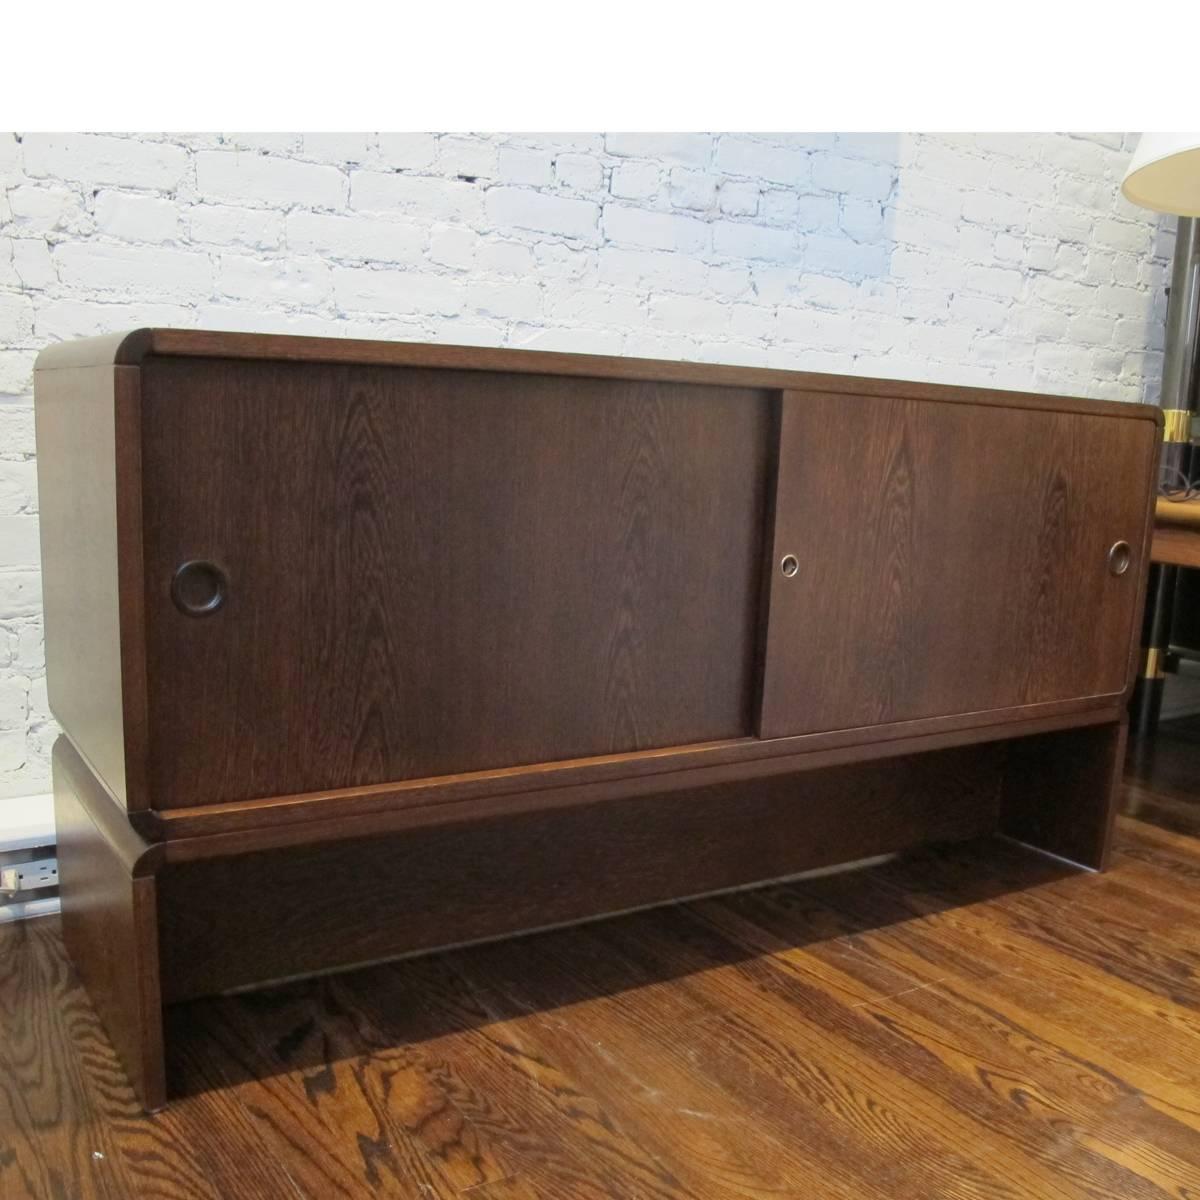 Small, low credenza designed by Martin Visser for Spectrum. Wenge with recessed wenge pulls, the cabinet has two sliding doors concealing two cabinets with adjustable shelves. Could be great for under a TV or as an oversized bedside or table.